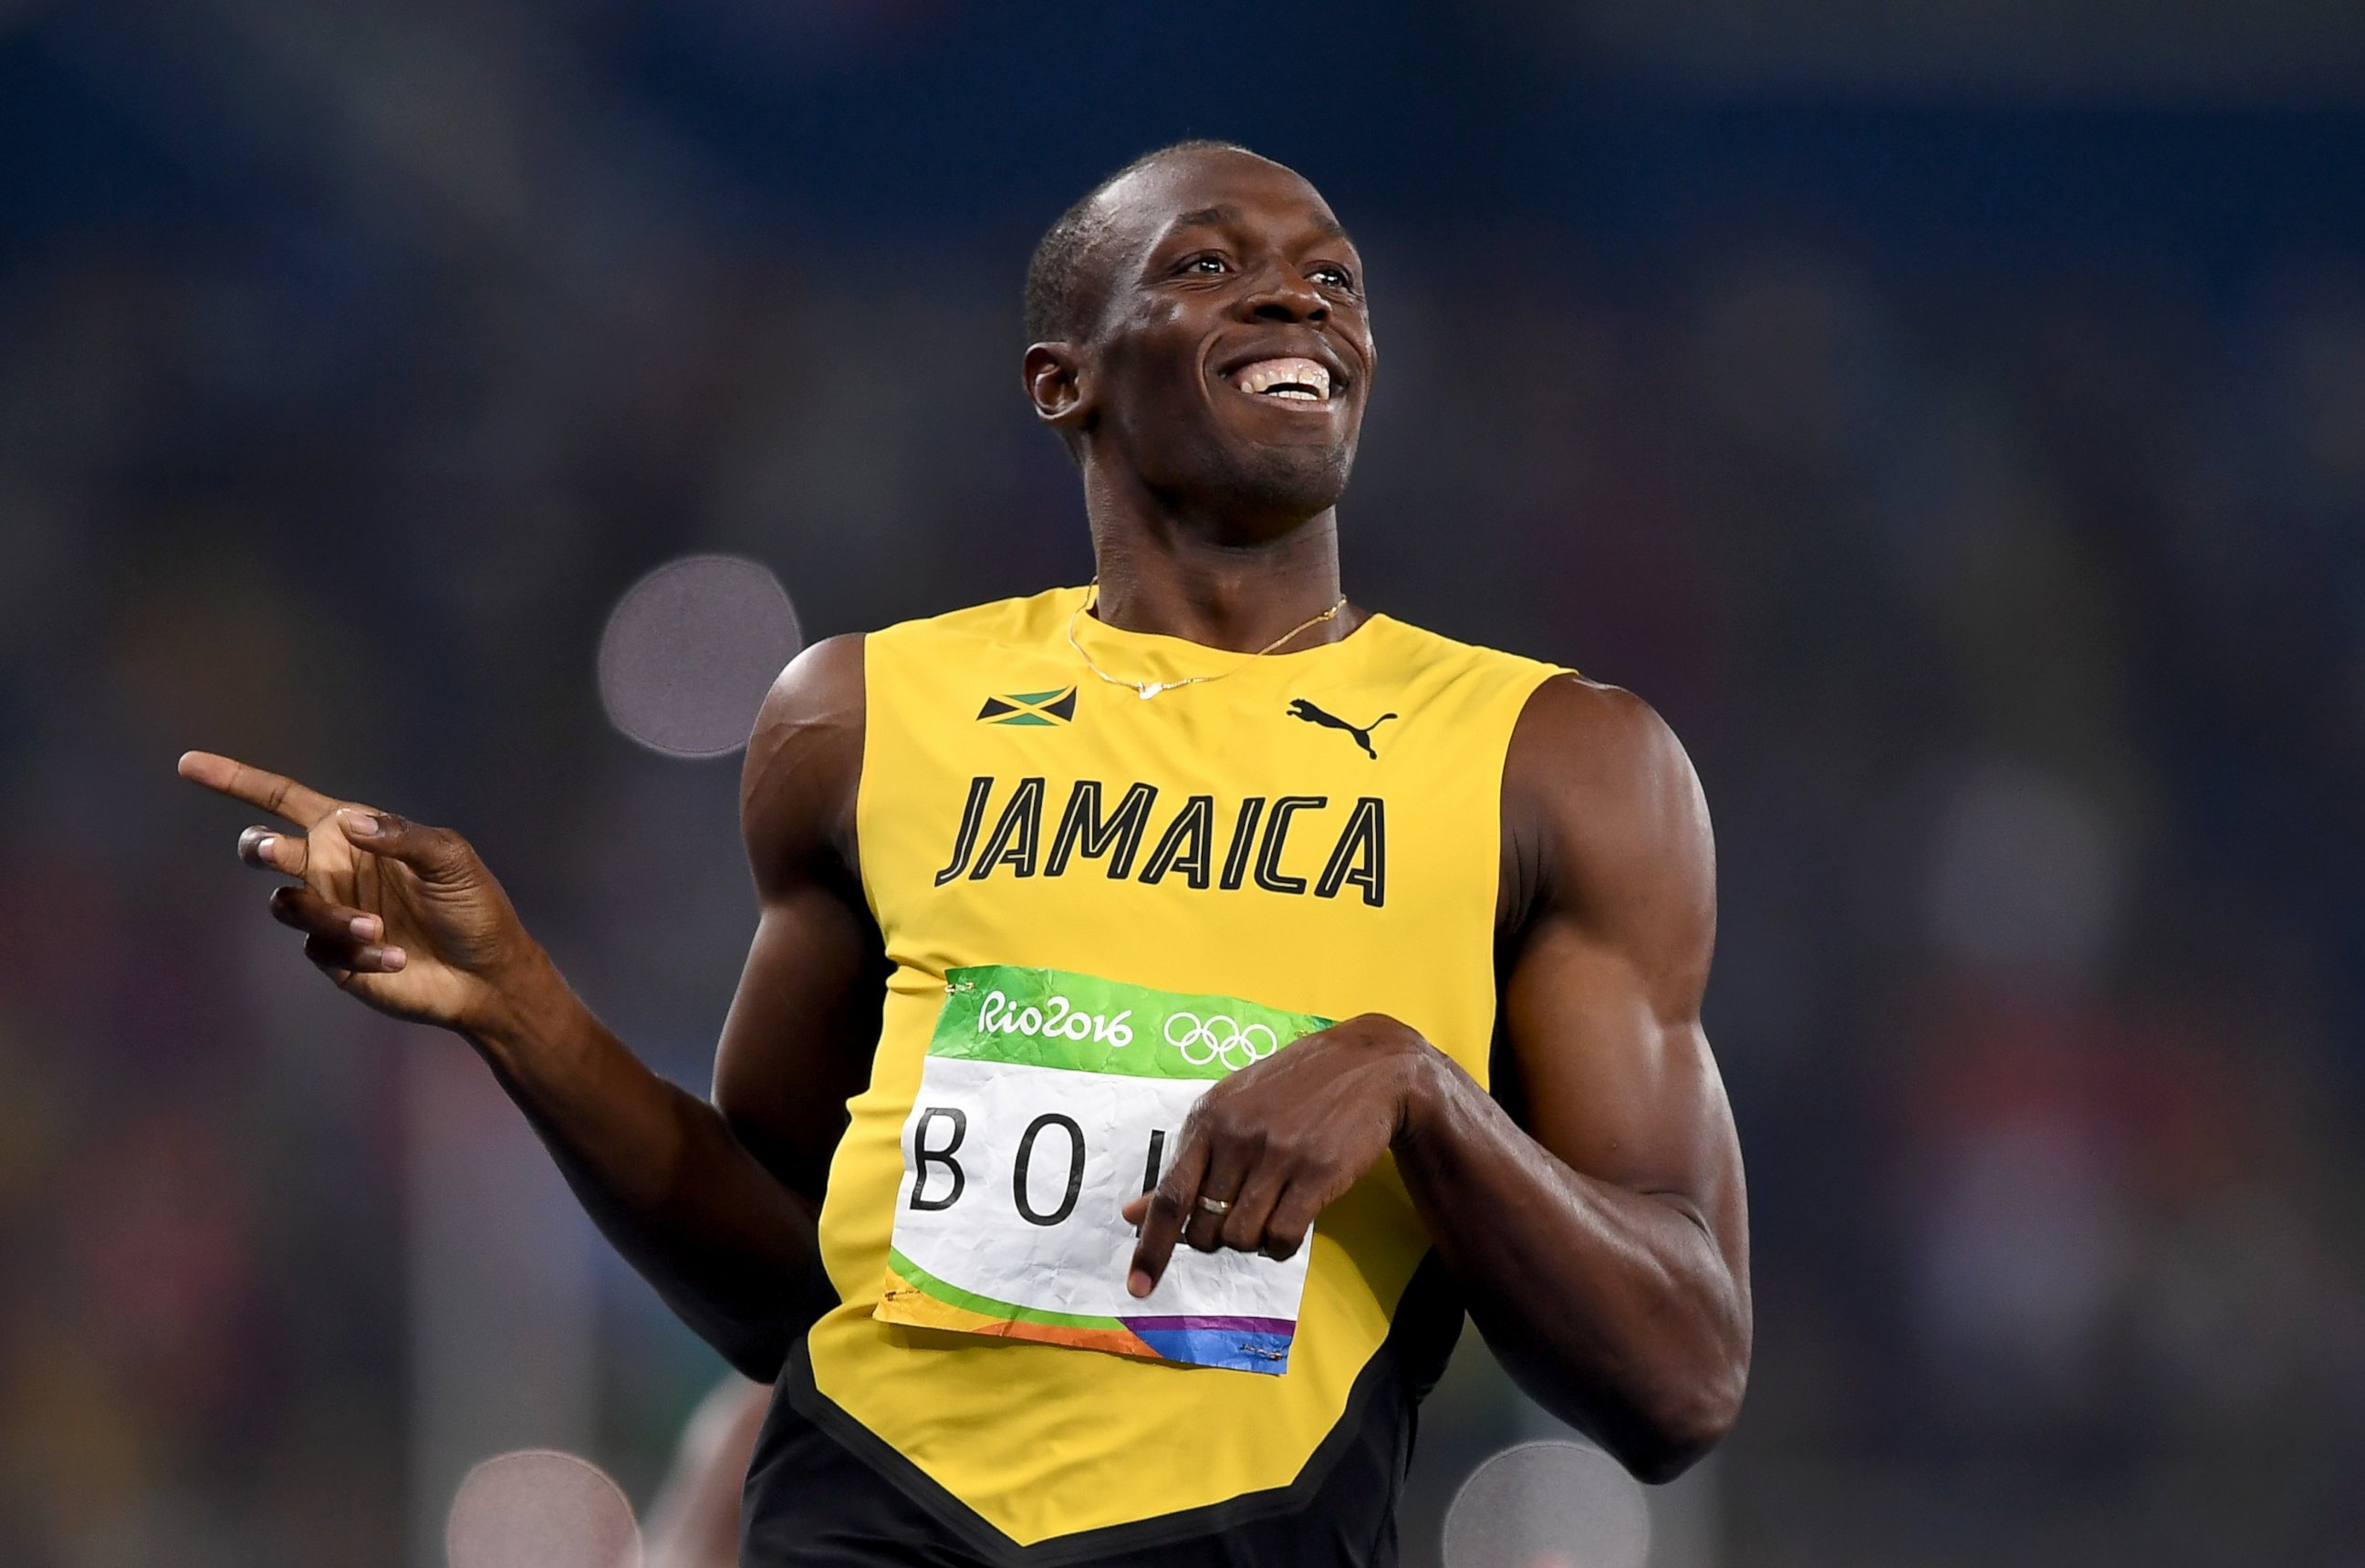 PHOTO: Usain Bolt of Jamaica reacts after competing in the Men's 200m Semifinals on Day 12 of the Rio 2016 Olympic Games at the Olympic Stadium, Aug. 17, 2016 in Rio de Janeiro.